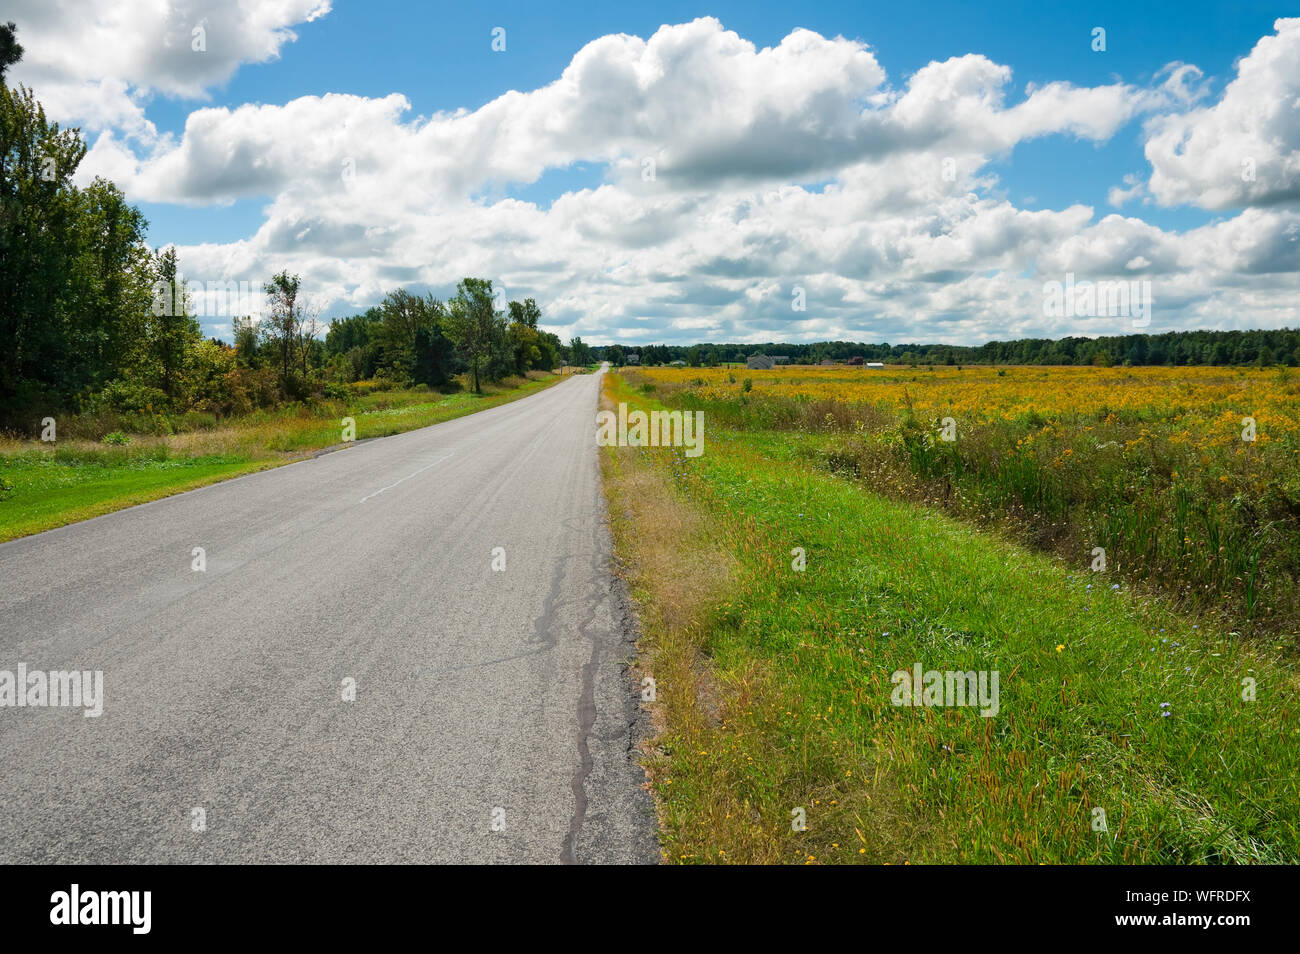 Country road in upstate New York Stock Photo